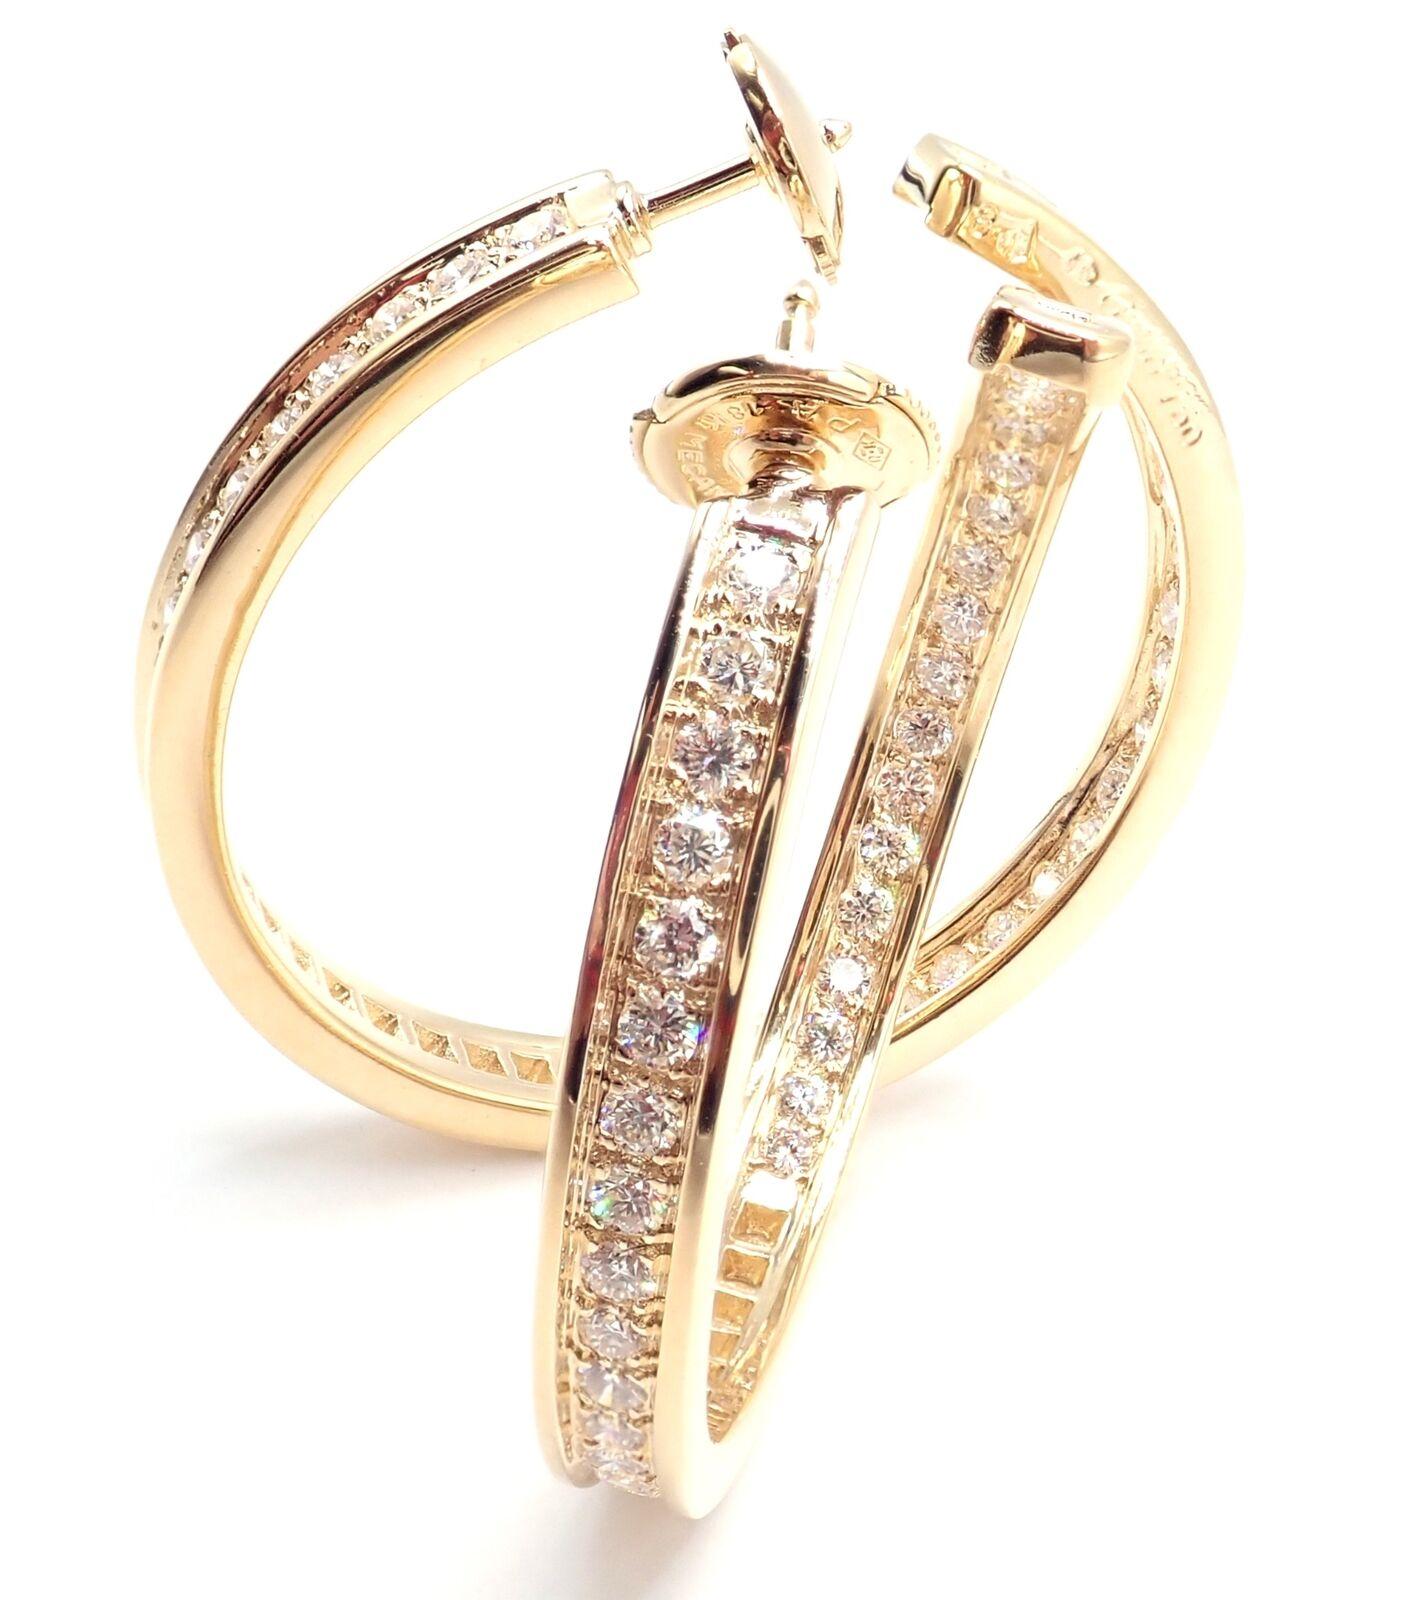 18k Yellow Gold Diamond Large hoop earrings by Cartier. 
With 90 round brilliant cut diamonds total weight approximately 2.94ct. 
Diamonds VS1 clarity, E color
These earrings come with Cartier box.
****Earrings are made for pierced ears
Details: